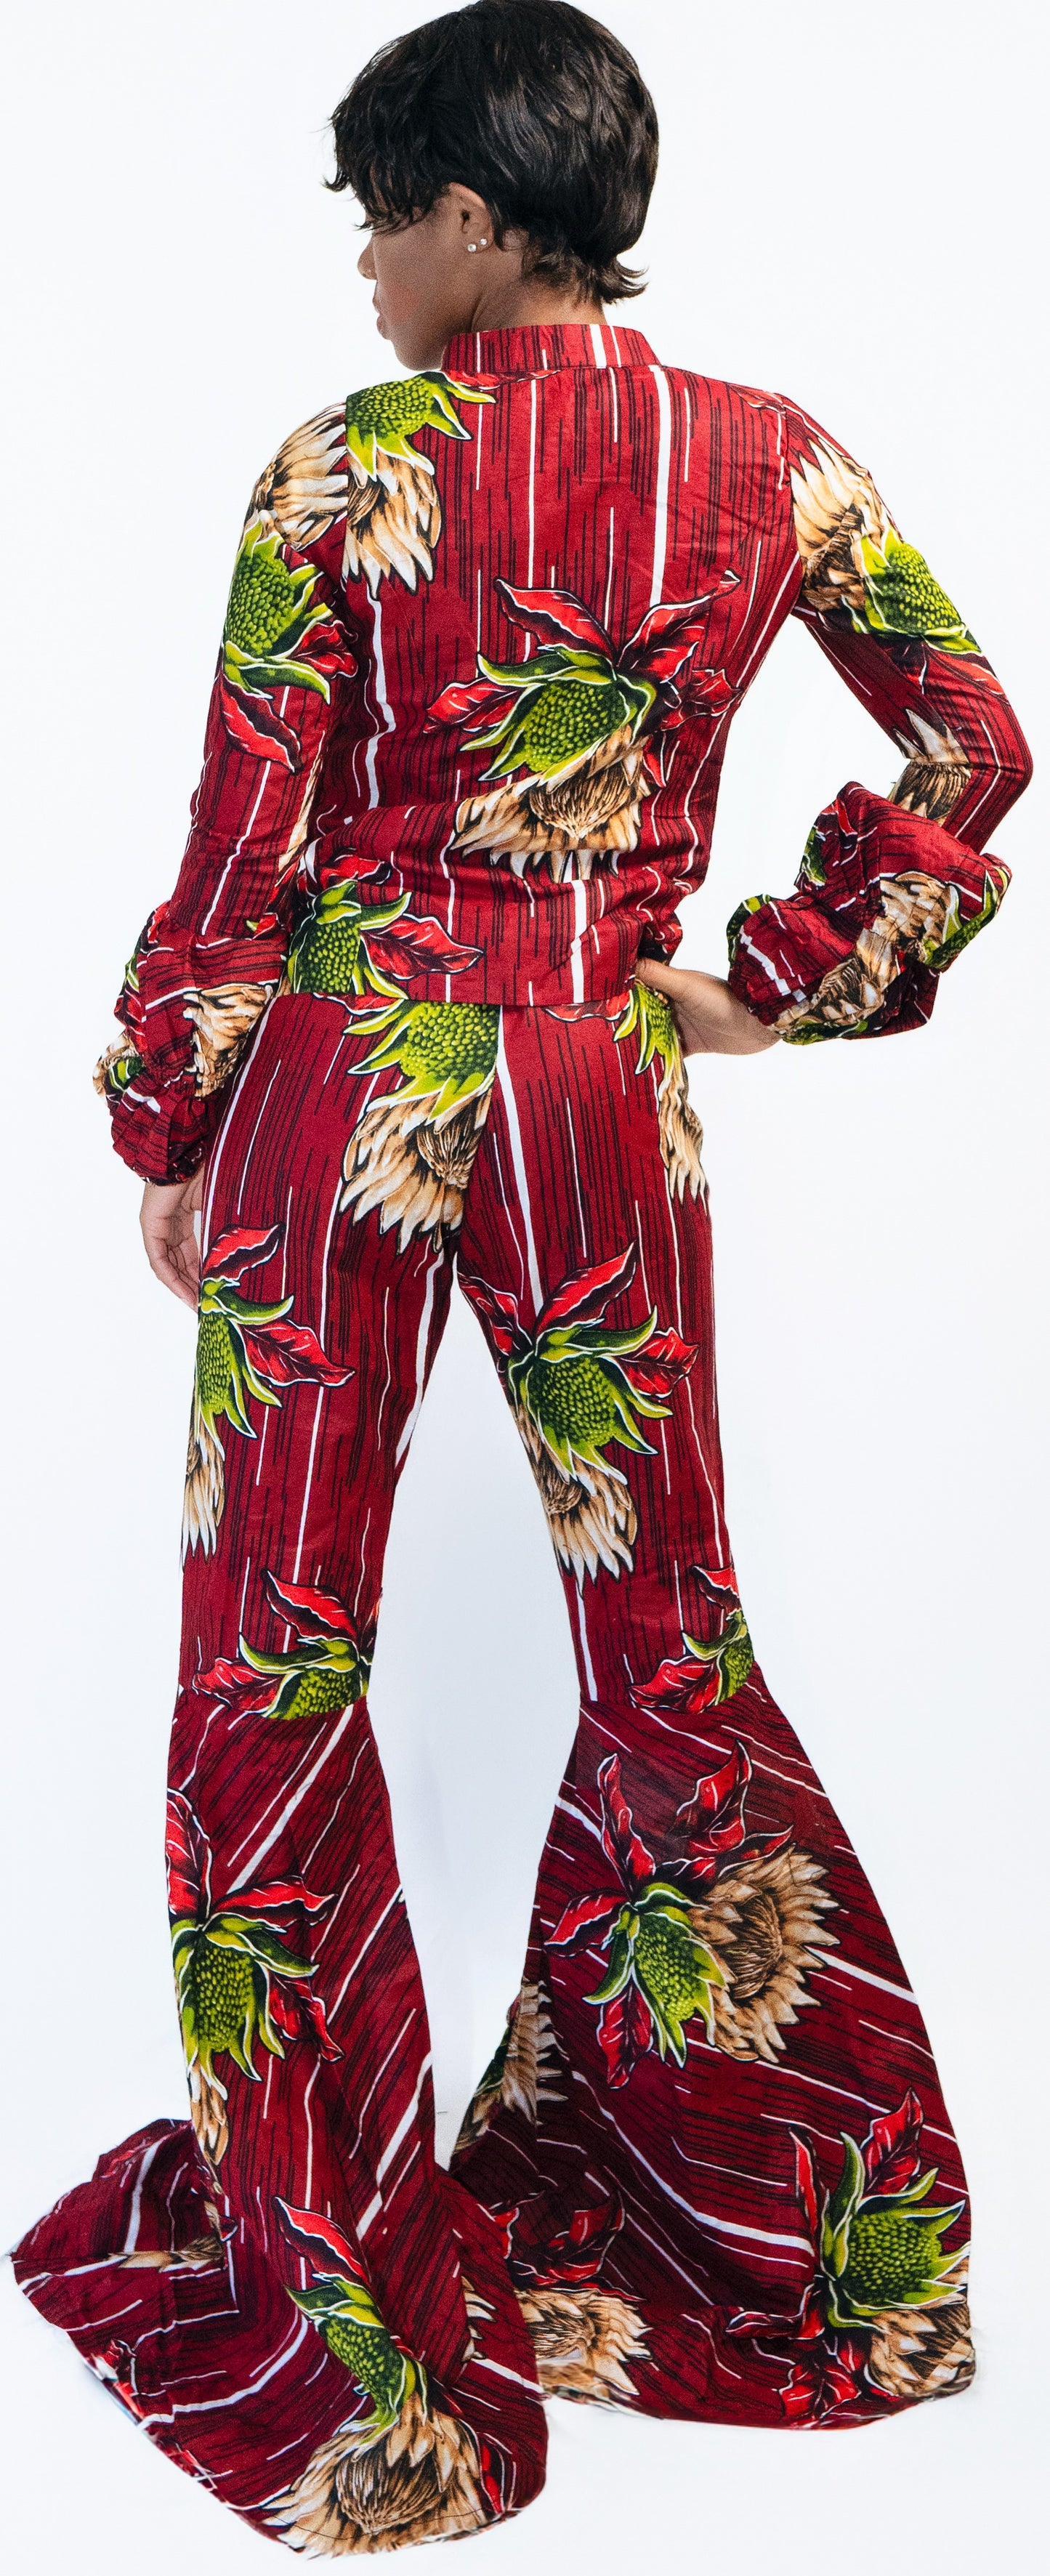 Prince Trio Long-sleeve Zipper Jacket, Spaghetti Top, and Over-long Flared Pants in Vibrant African Print